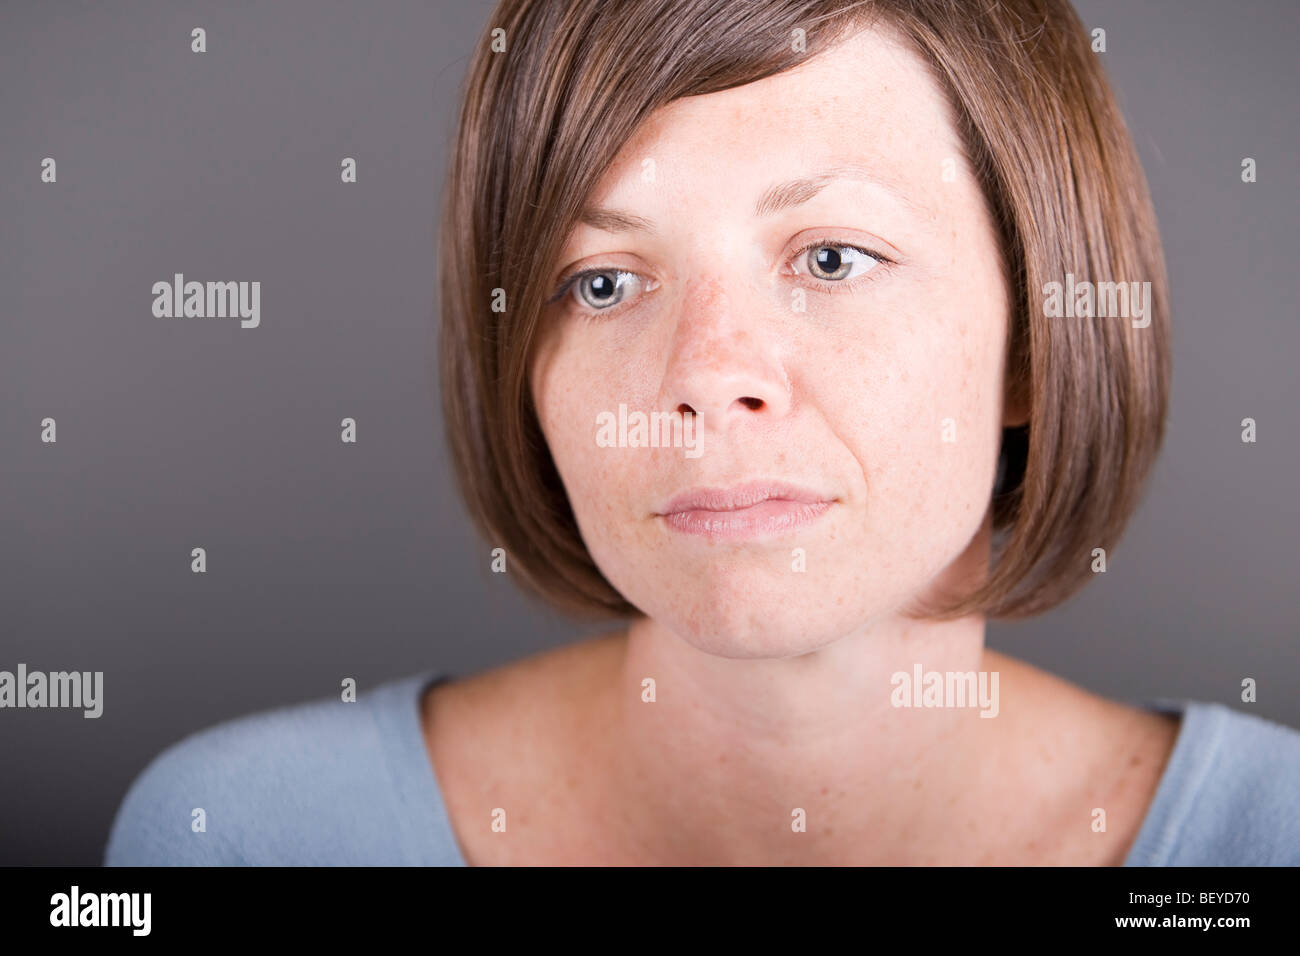 Beautiful Middle-aged woman in thoughtful mode Stock Photo